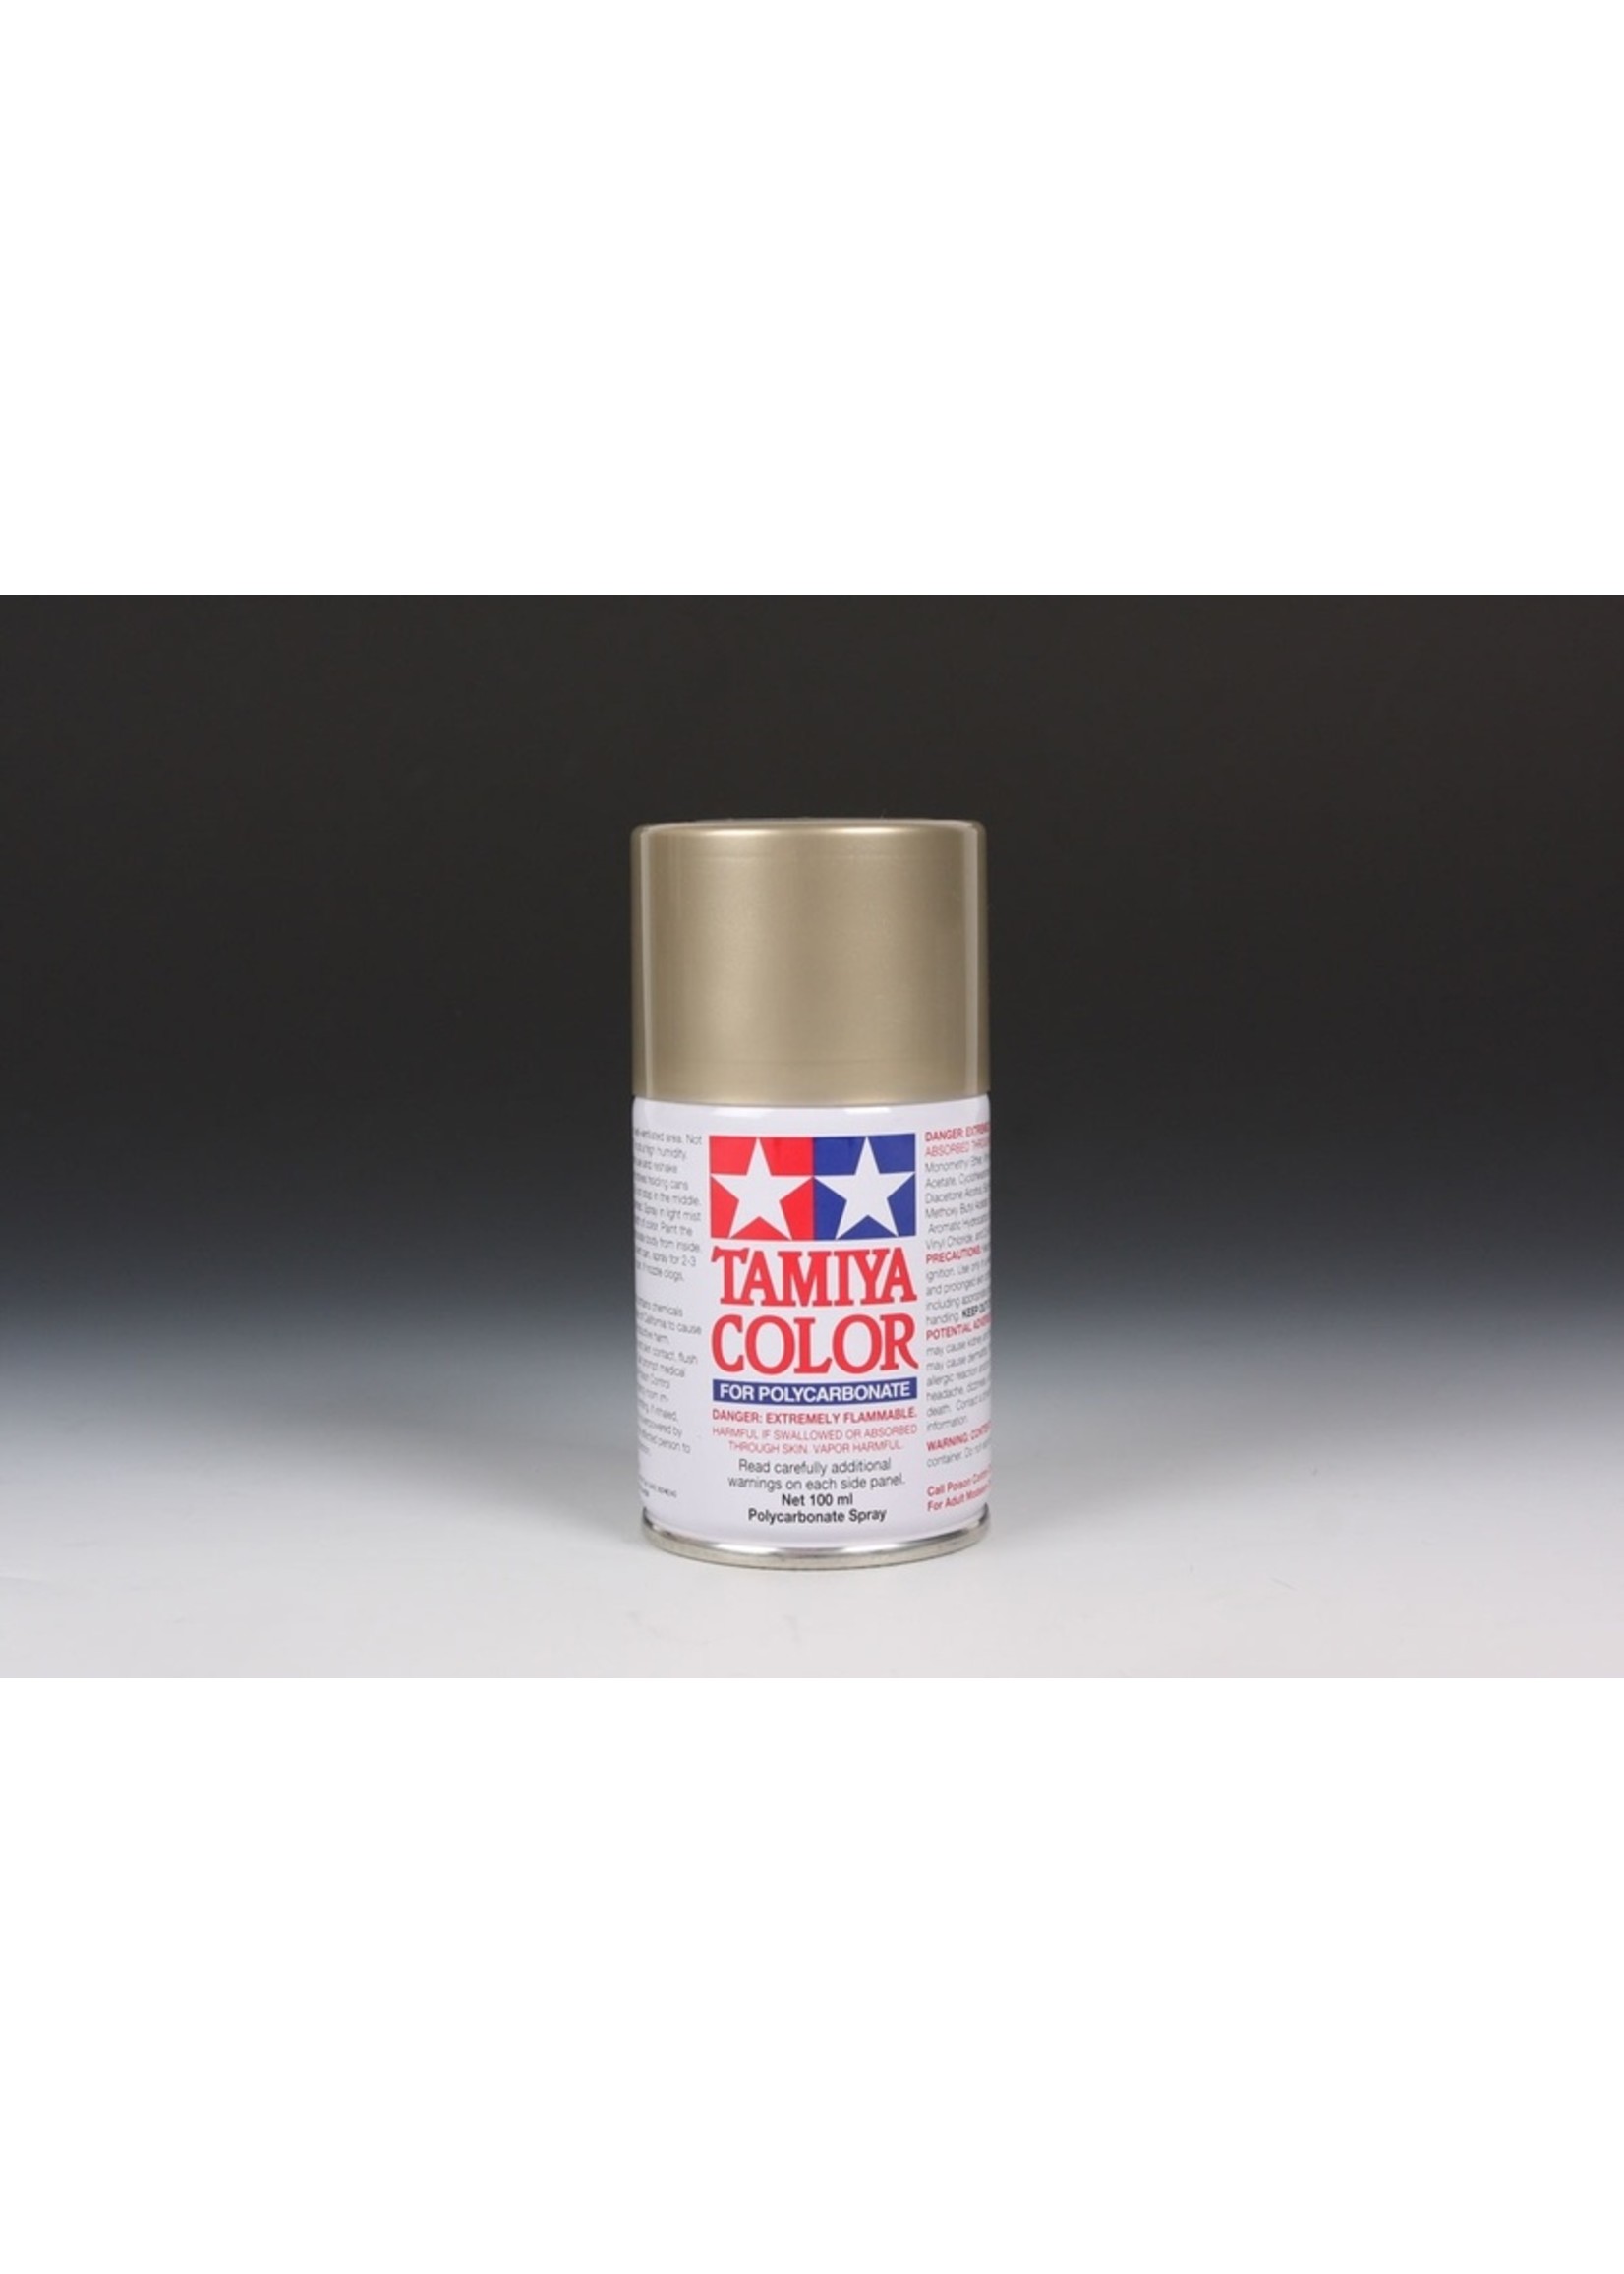 Tamiya PS-52 Champagne Gold Anodized Alum 100ml Spray Can